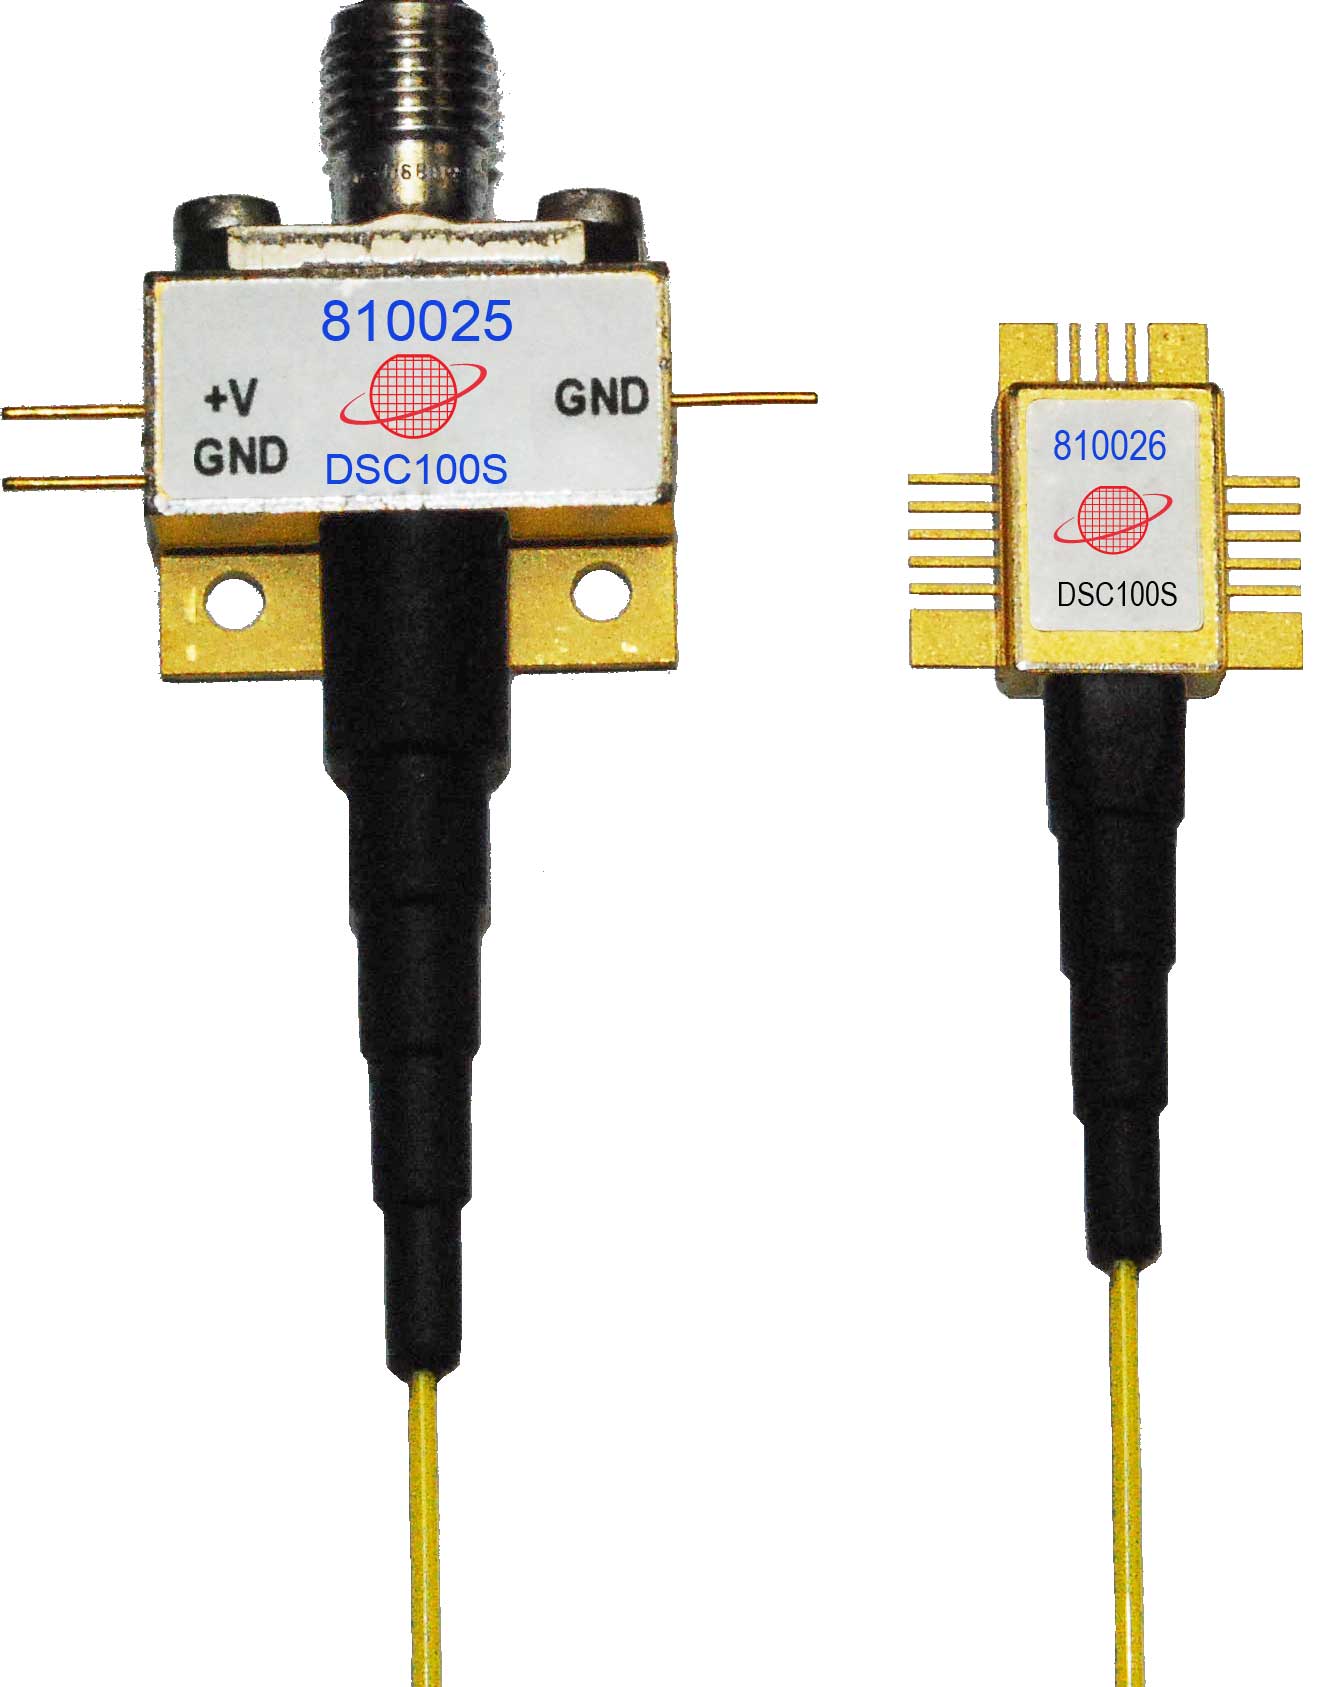 High Optical Power Handling, Highly Linear 2.2 Micron Wavelength InGaAs Photodiodes up to 5 Ghz